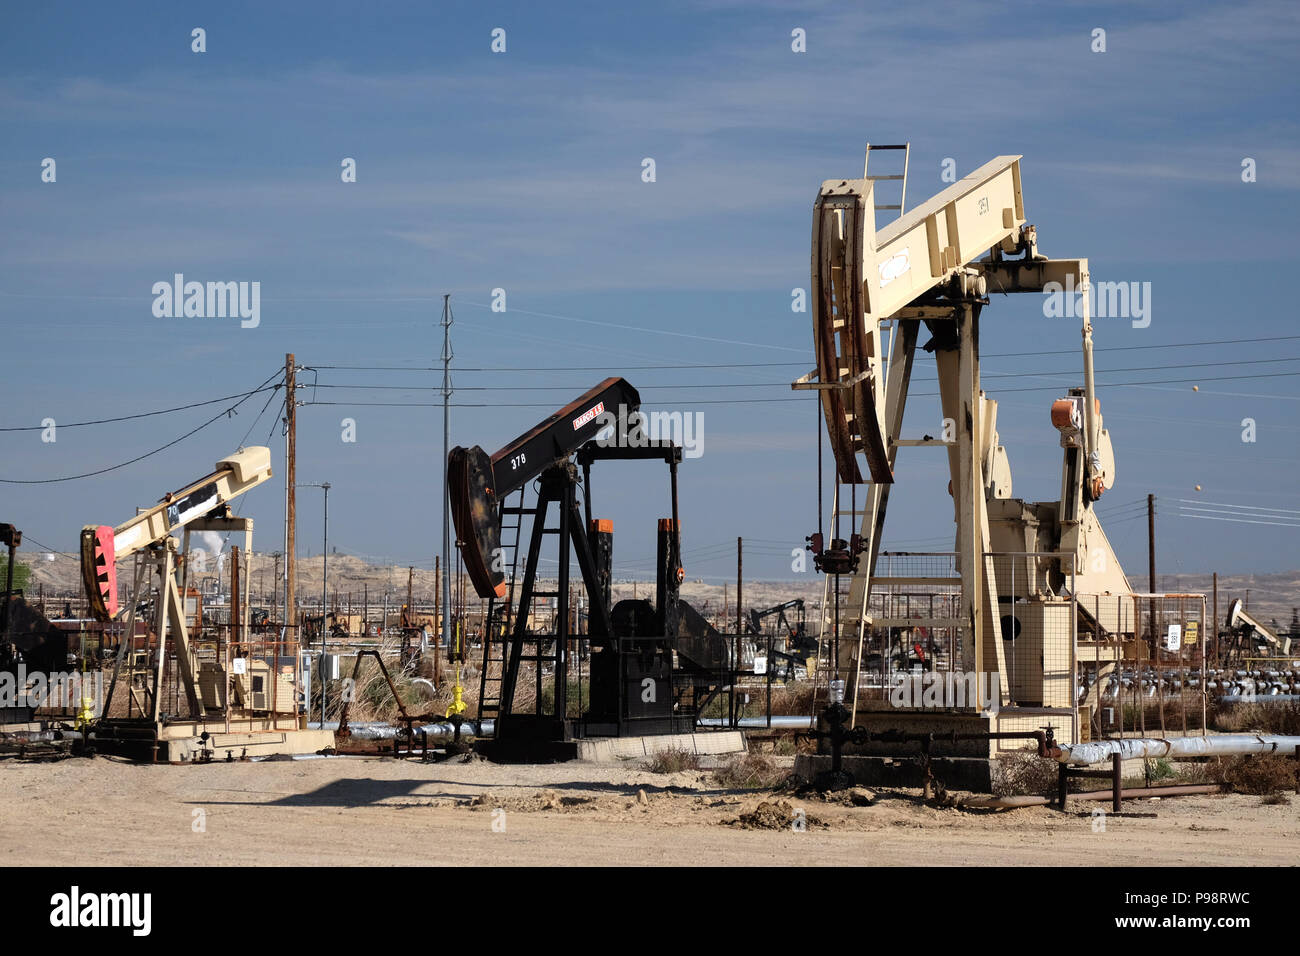 Busy pumpjacks at work in the Sunset-Midway oil field in kern county california Stock Photo